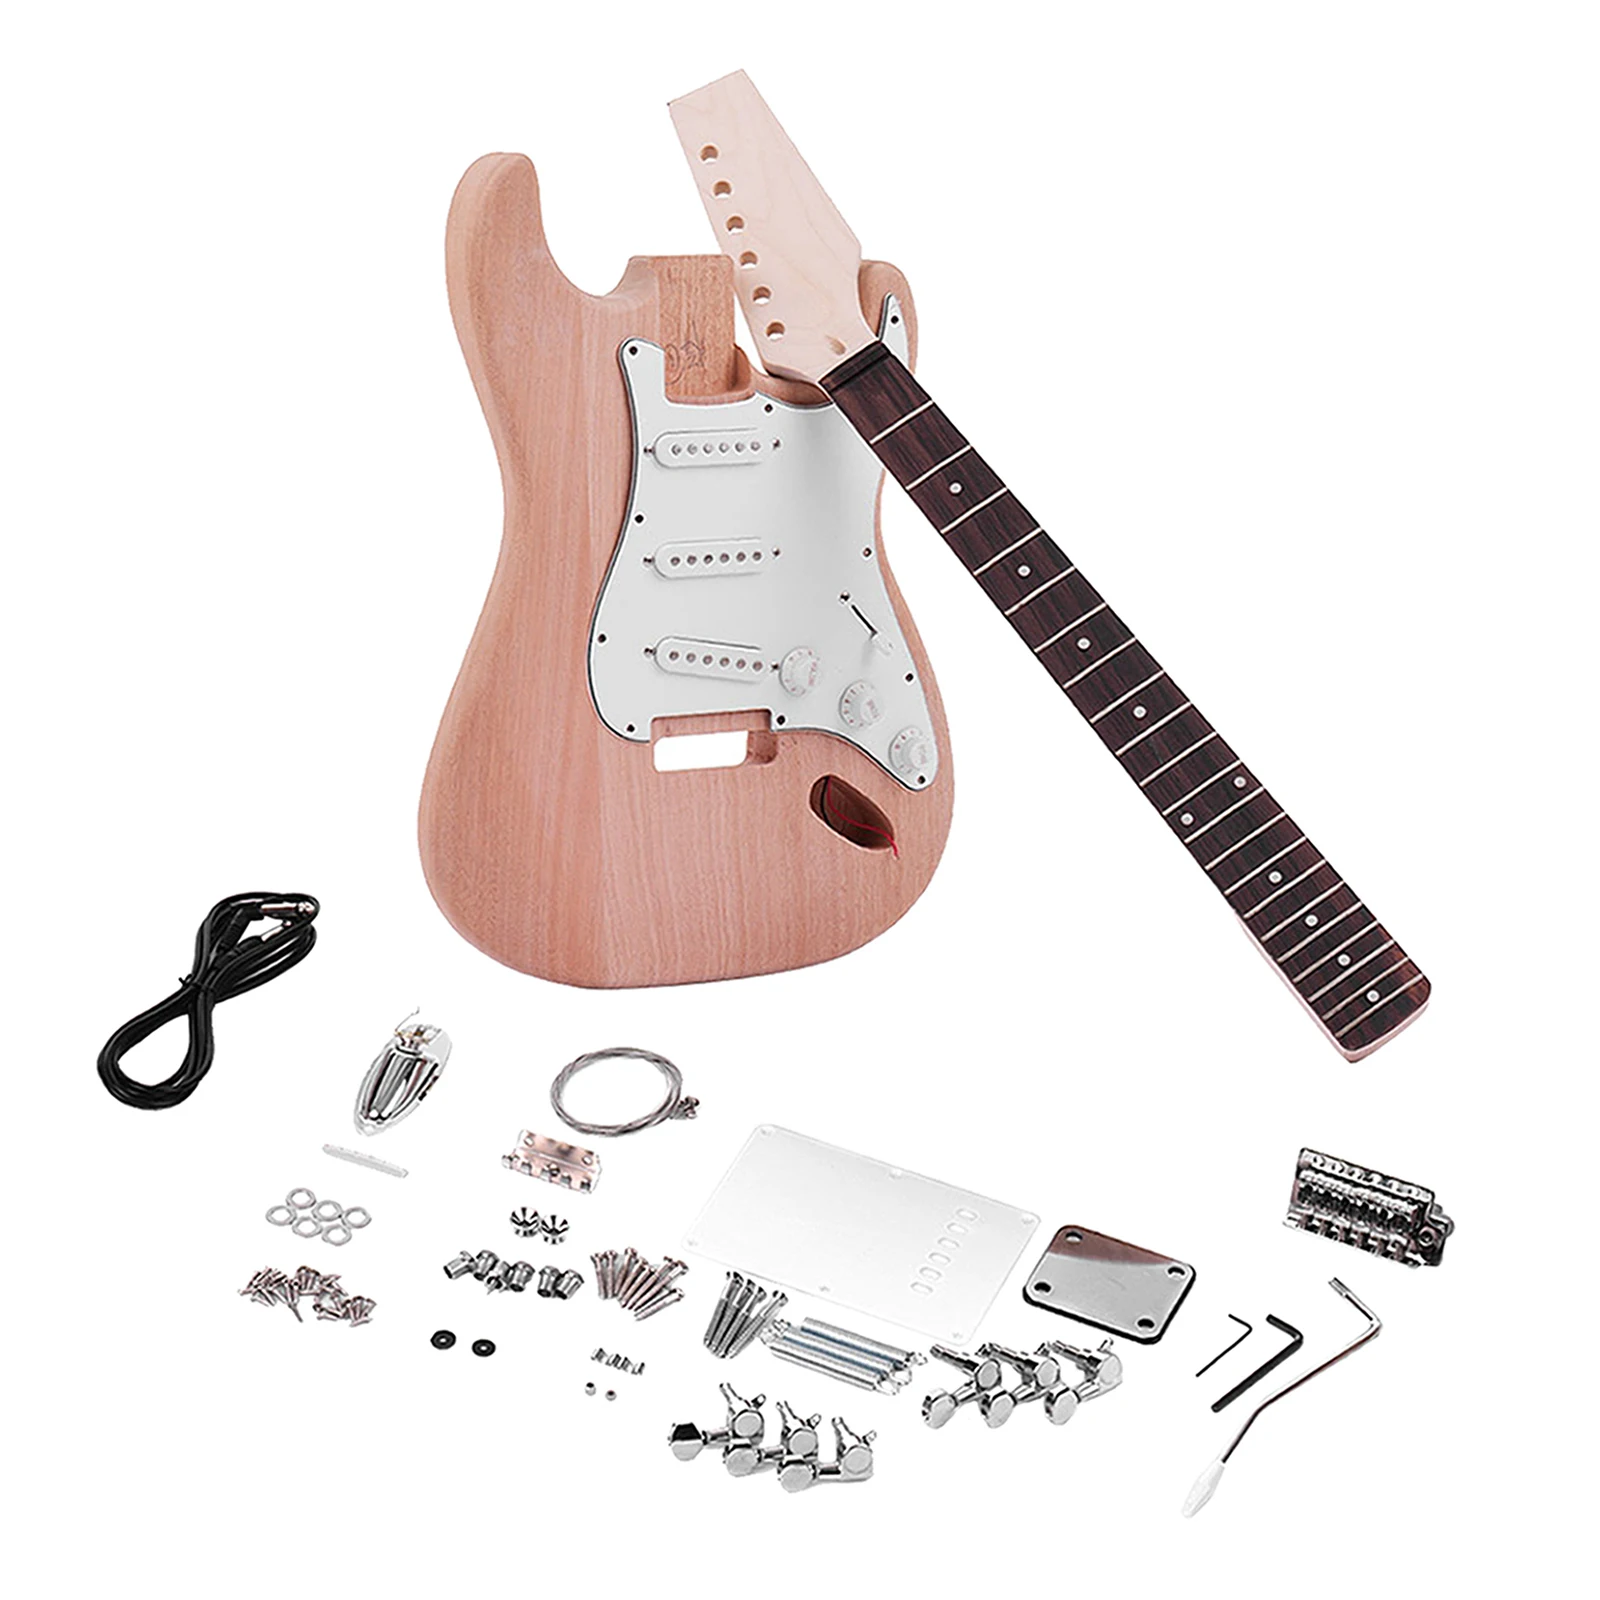 mølle faldskærm Perforering Unfinished Electric Guitar Body DIY Handcrafted Guitar Body Spare Parts  Easy to Make Your Own Guitar|Electric Guitar| - AliExpress